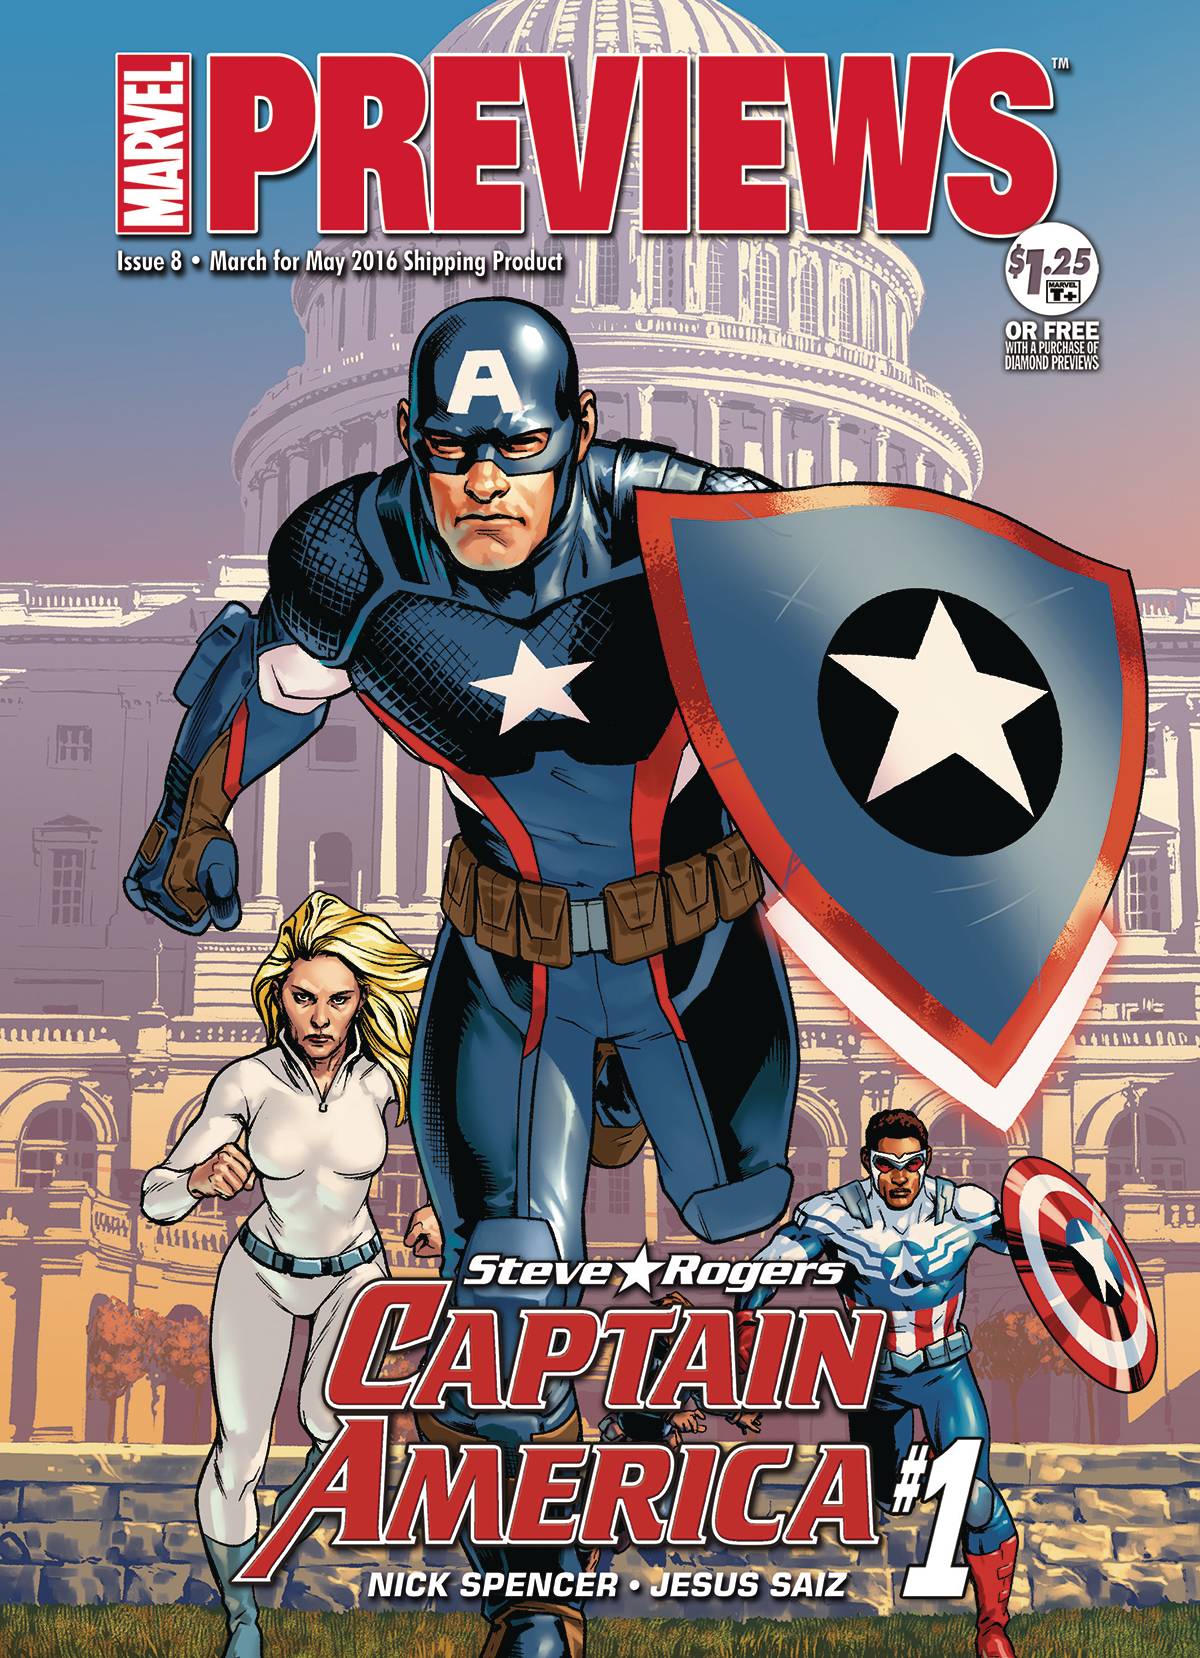 Marvel Previews #10 May 2016 Extras #154